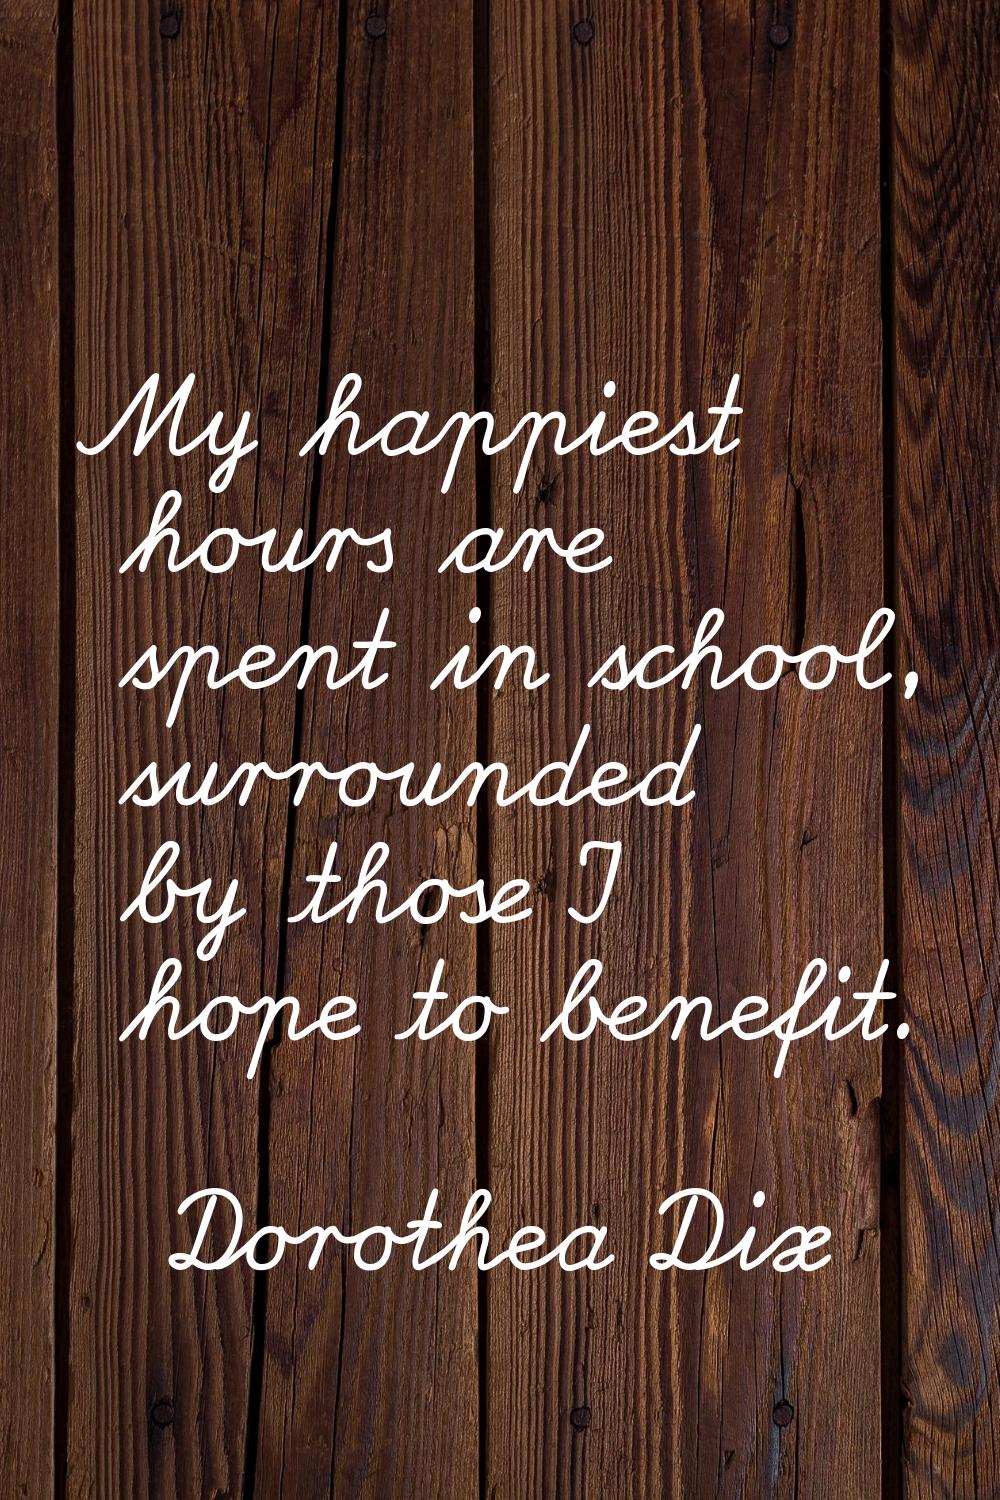 My happiest hours are spent in school, surrounded by those I hope to benefit.